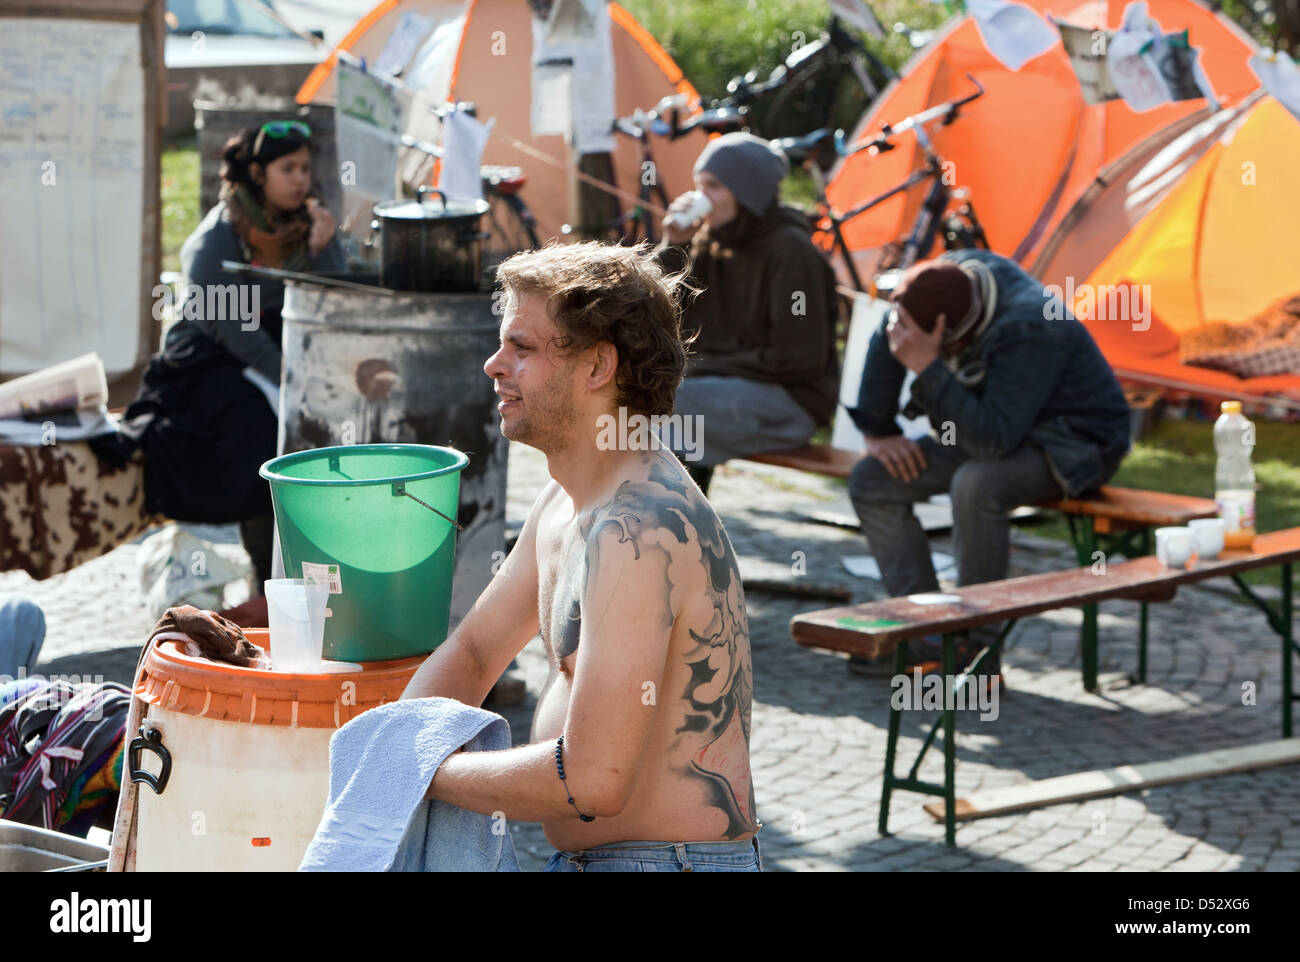 Frankfurt am Main, Germany, supporters of the Occupy movement demonstrate outside the ECB Stock Photo